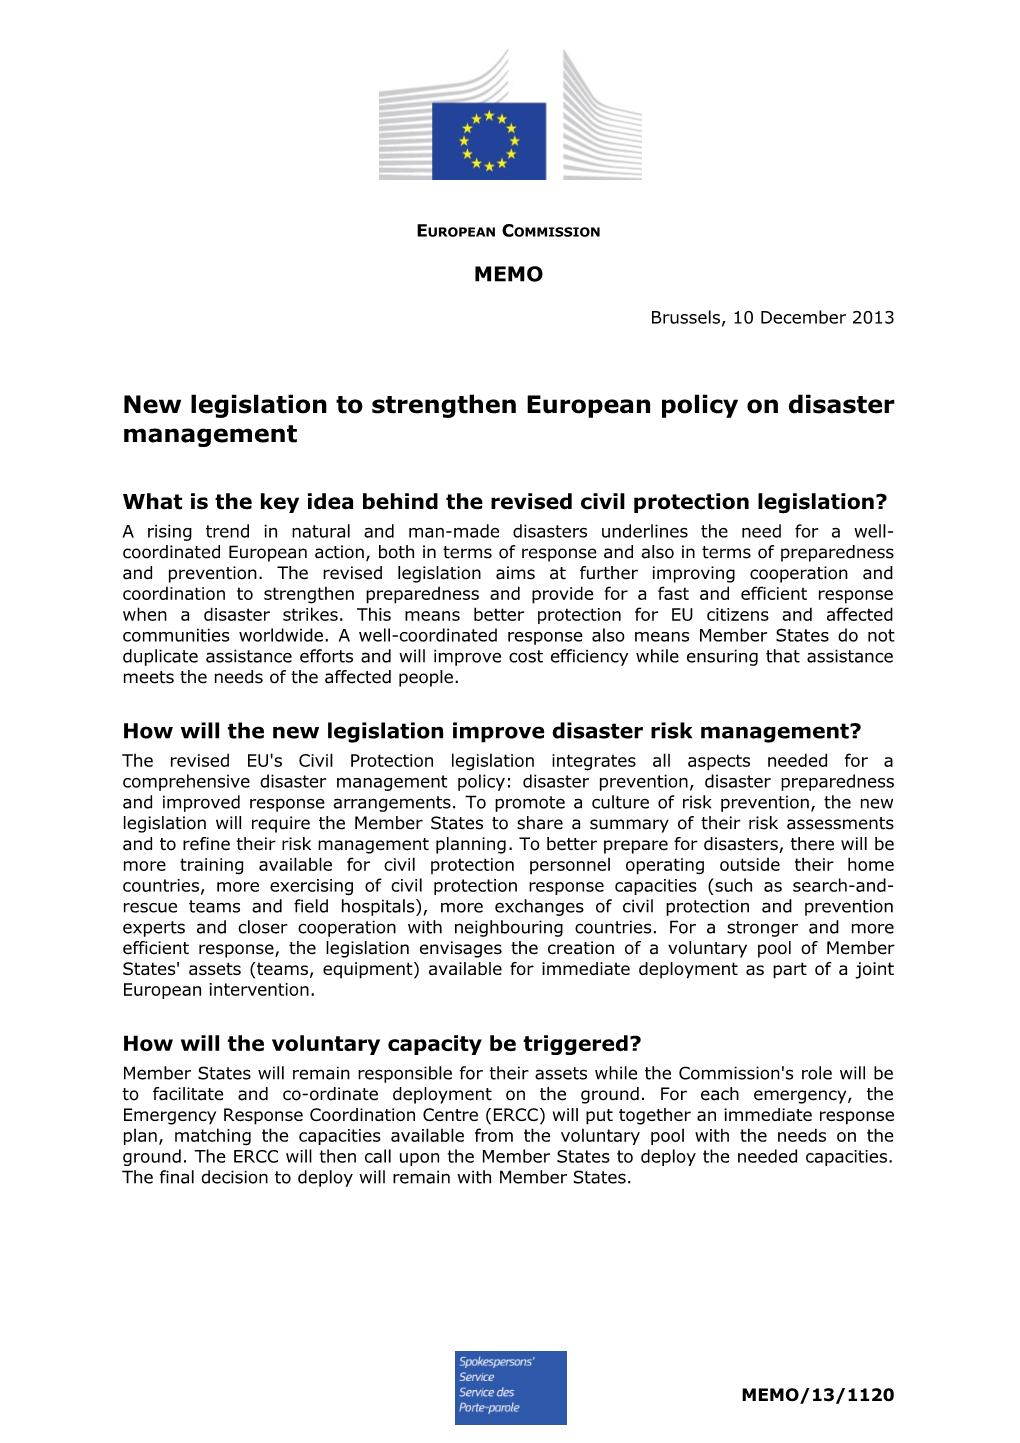 New Legislation to Strengthen European Policy on Disaster Management